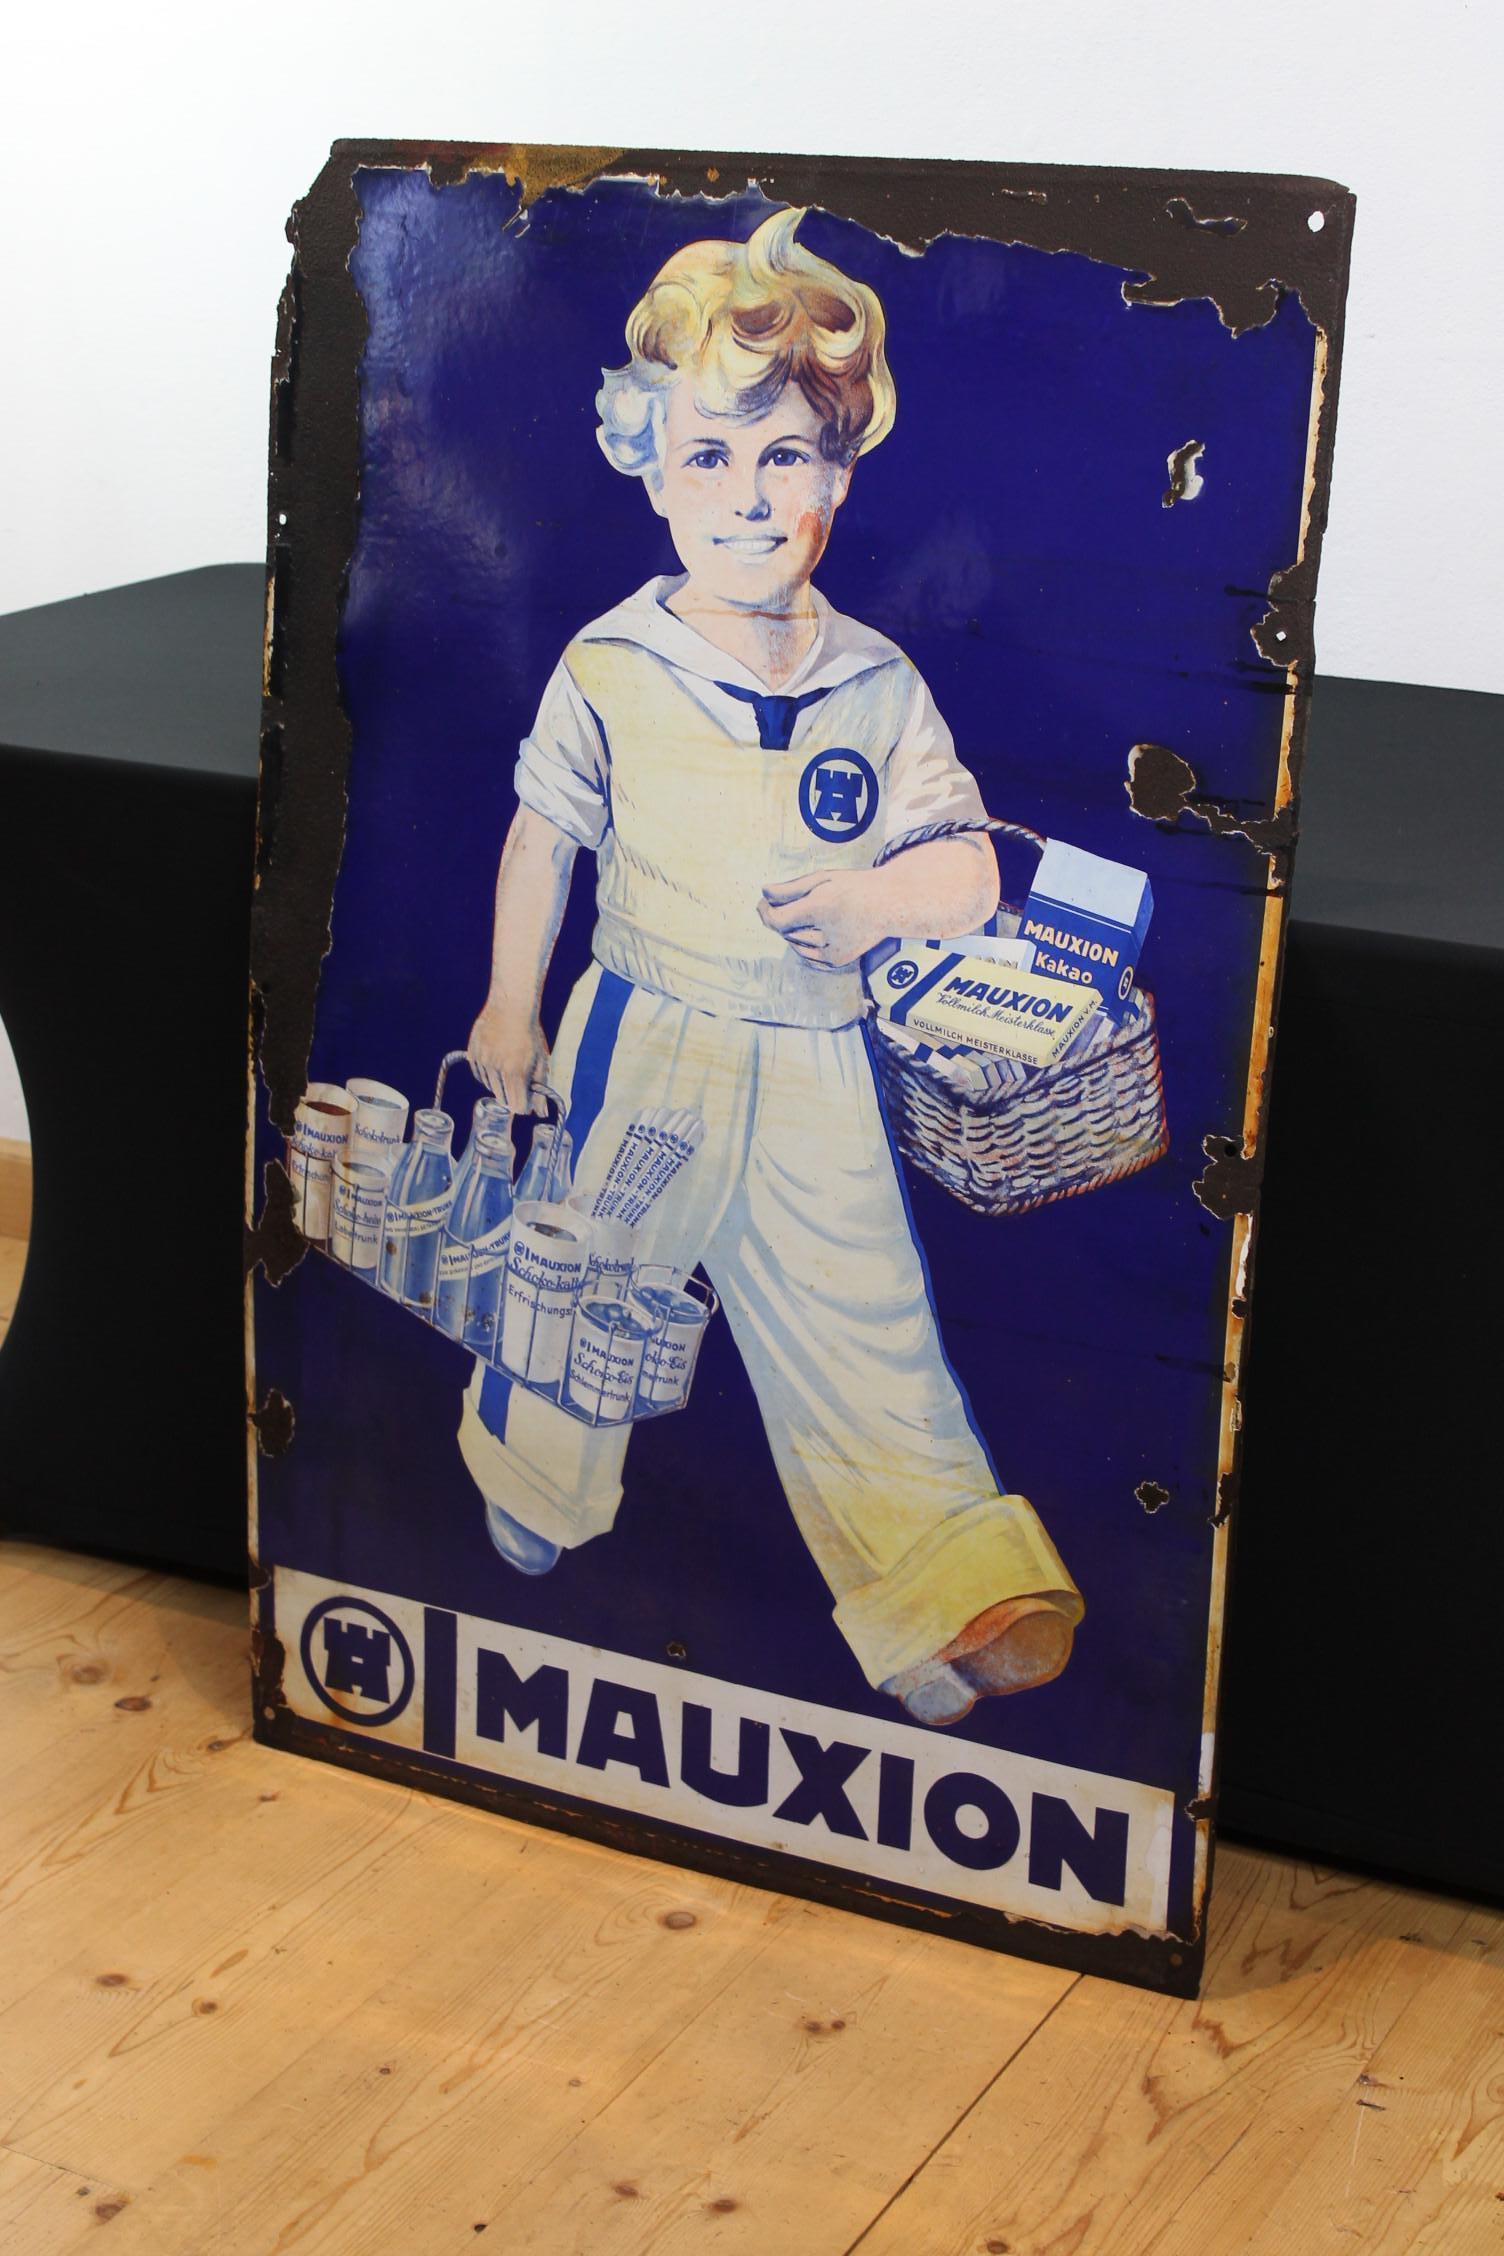 Large Porcelain Sign Mauxion Chocolat, 1920s, Germany  For Sale 5